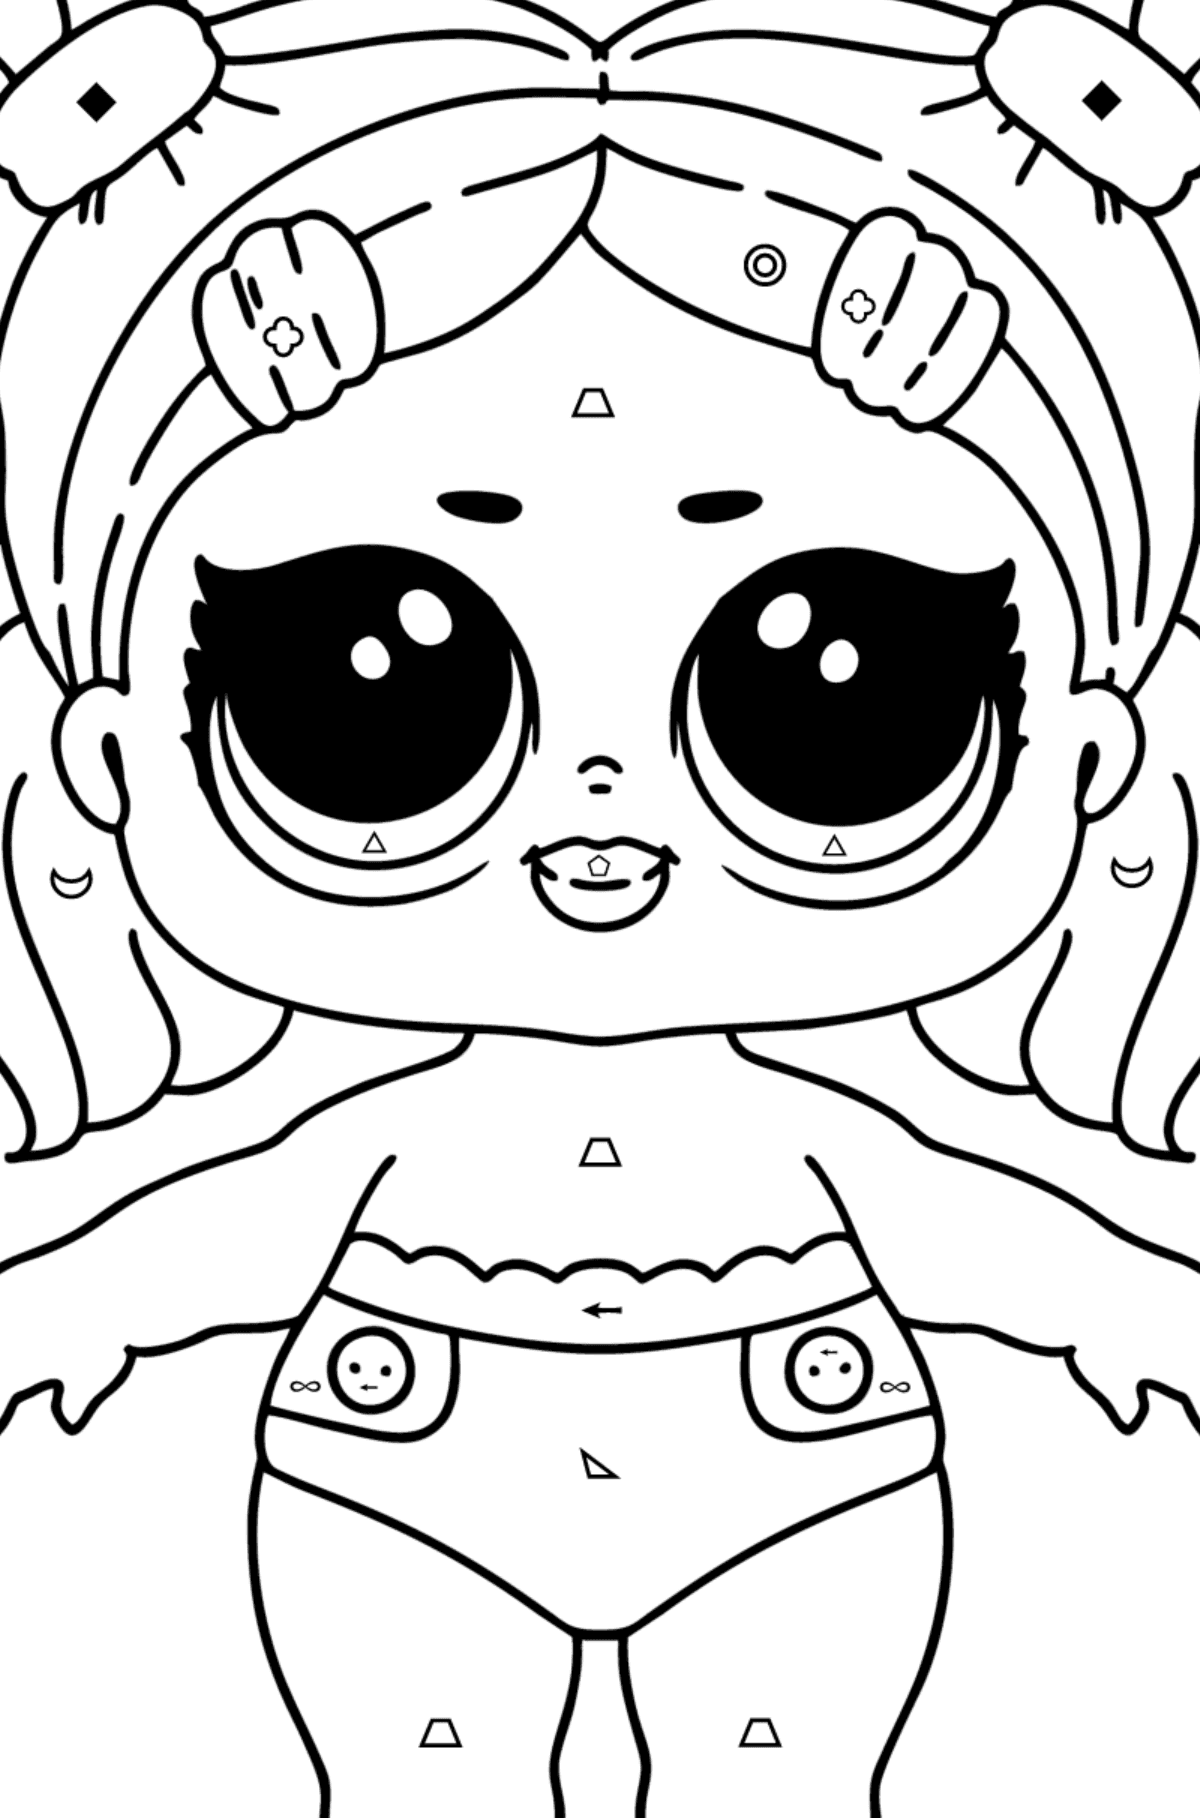 Coloring page LOL LIL Dusk - Coloring by Symbols and Geometric Shapes for Kids